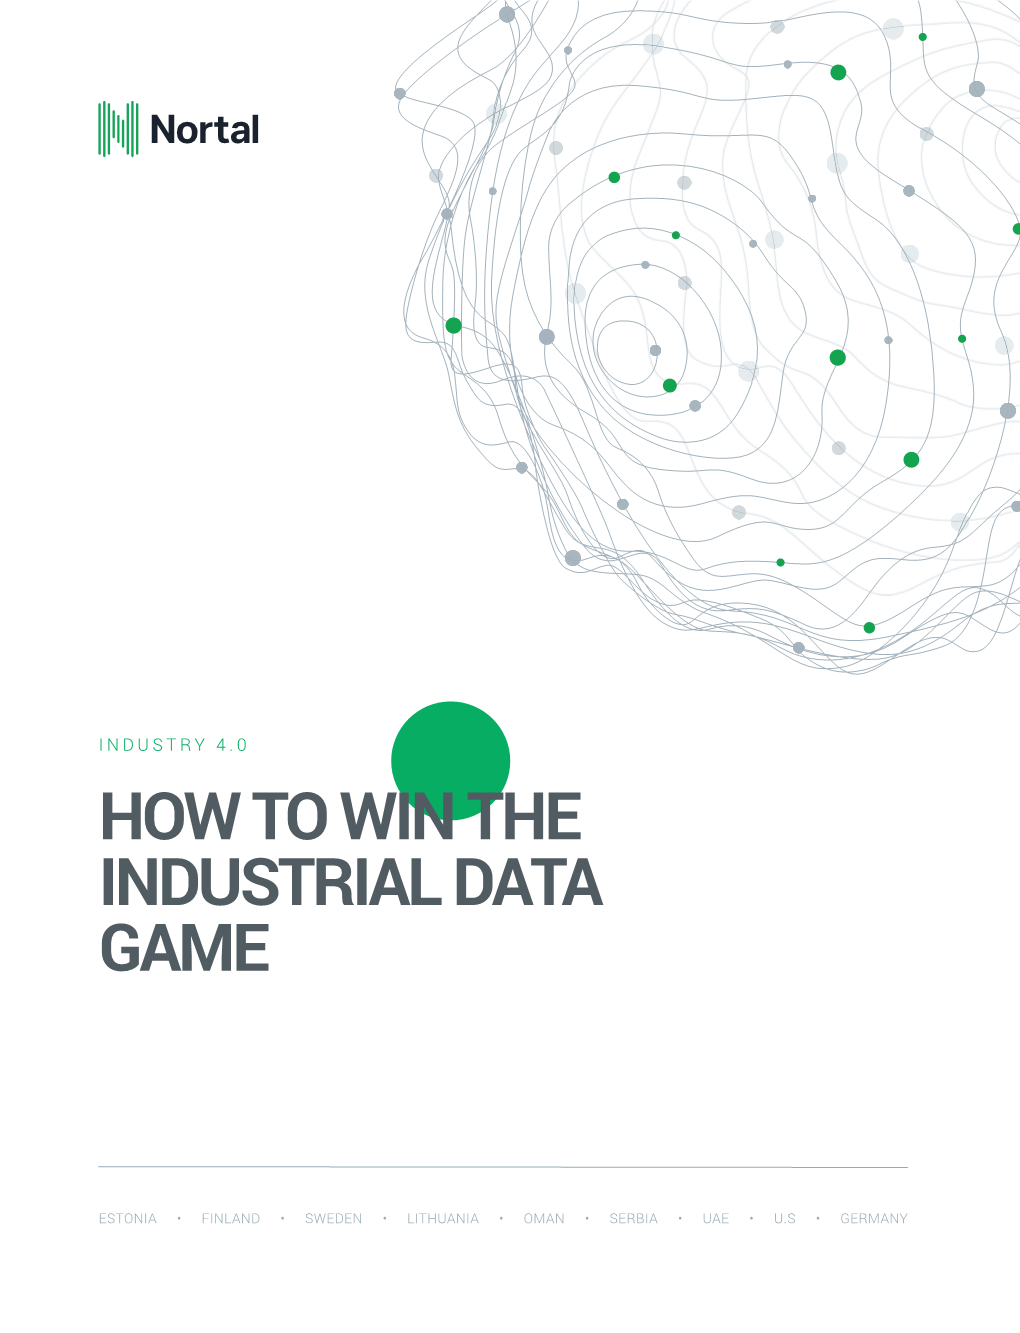 How to Win the Industrial Data Game